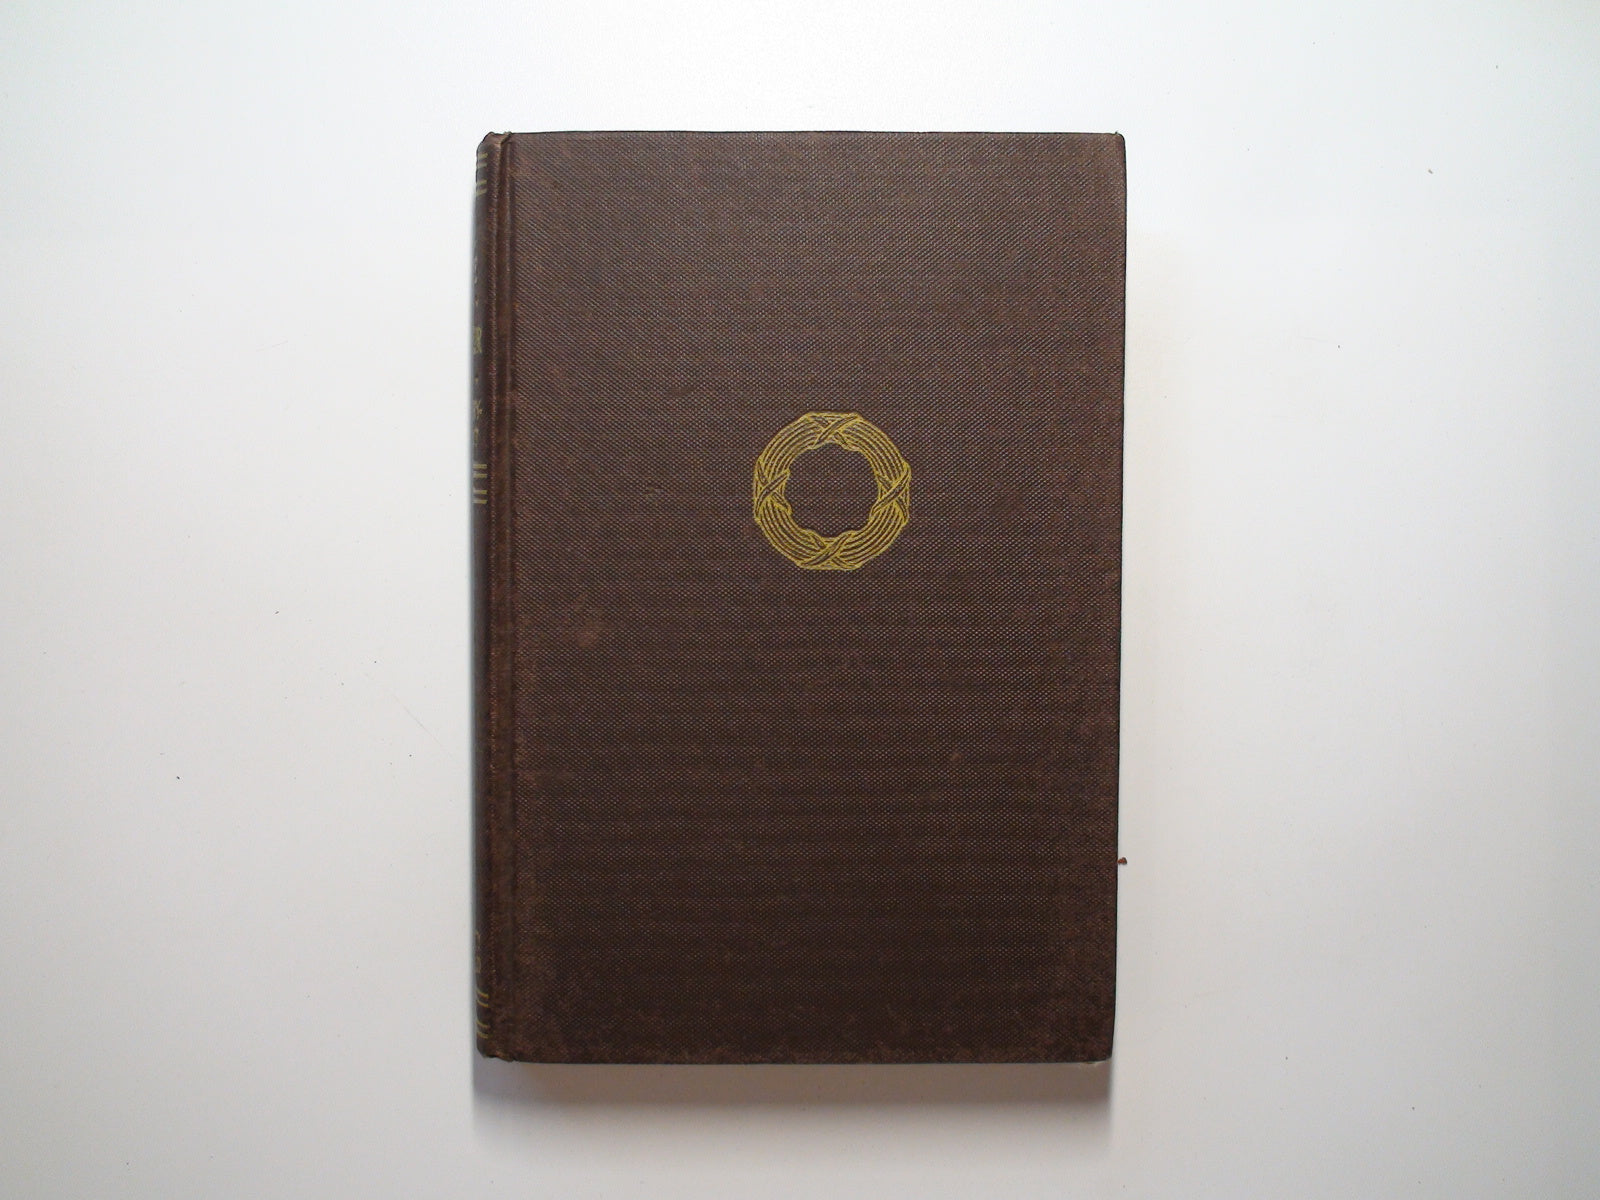 The Life of Pasteur, by Mrs. R. L. Dovonshire, Rene Vallery-Radot, c1930s